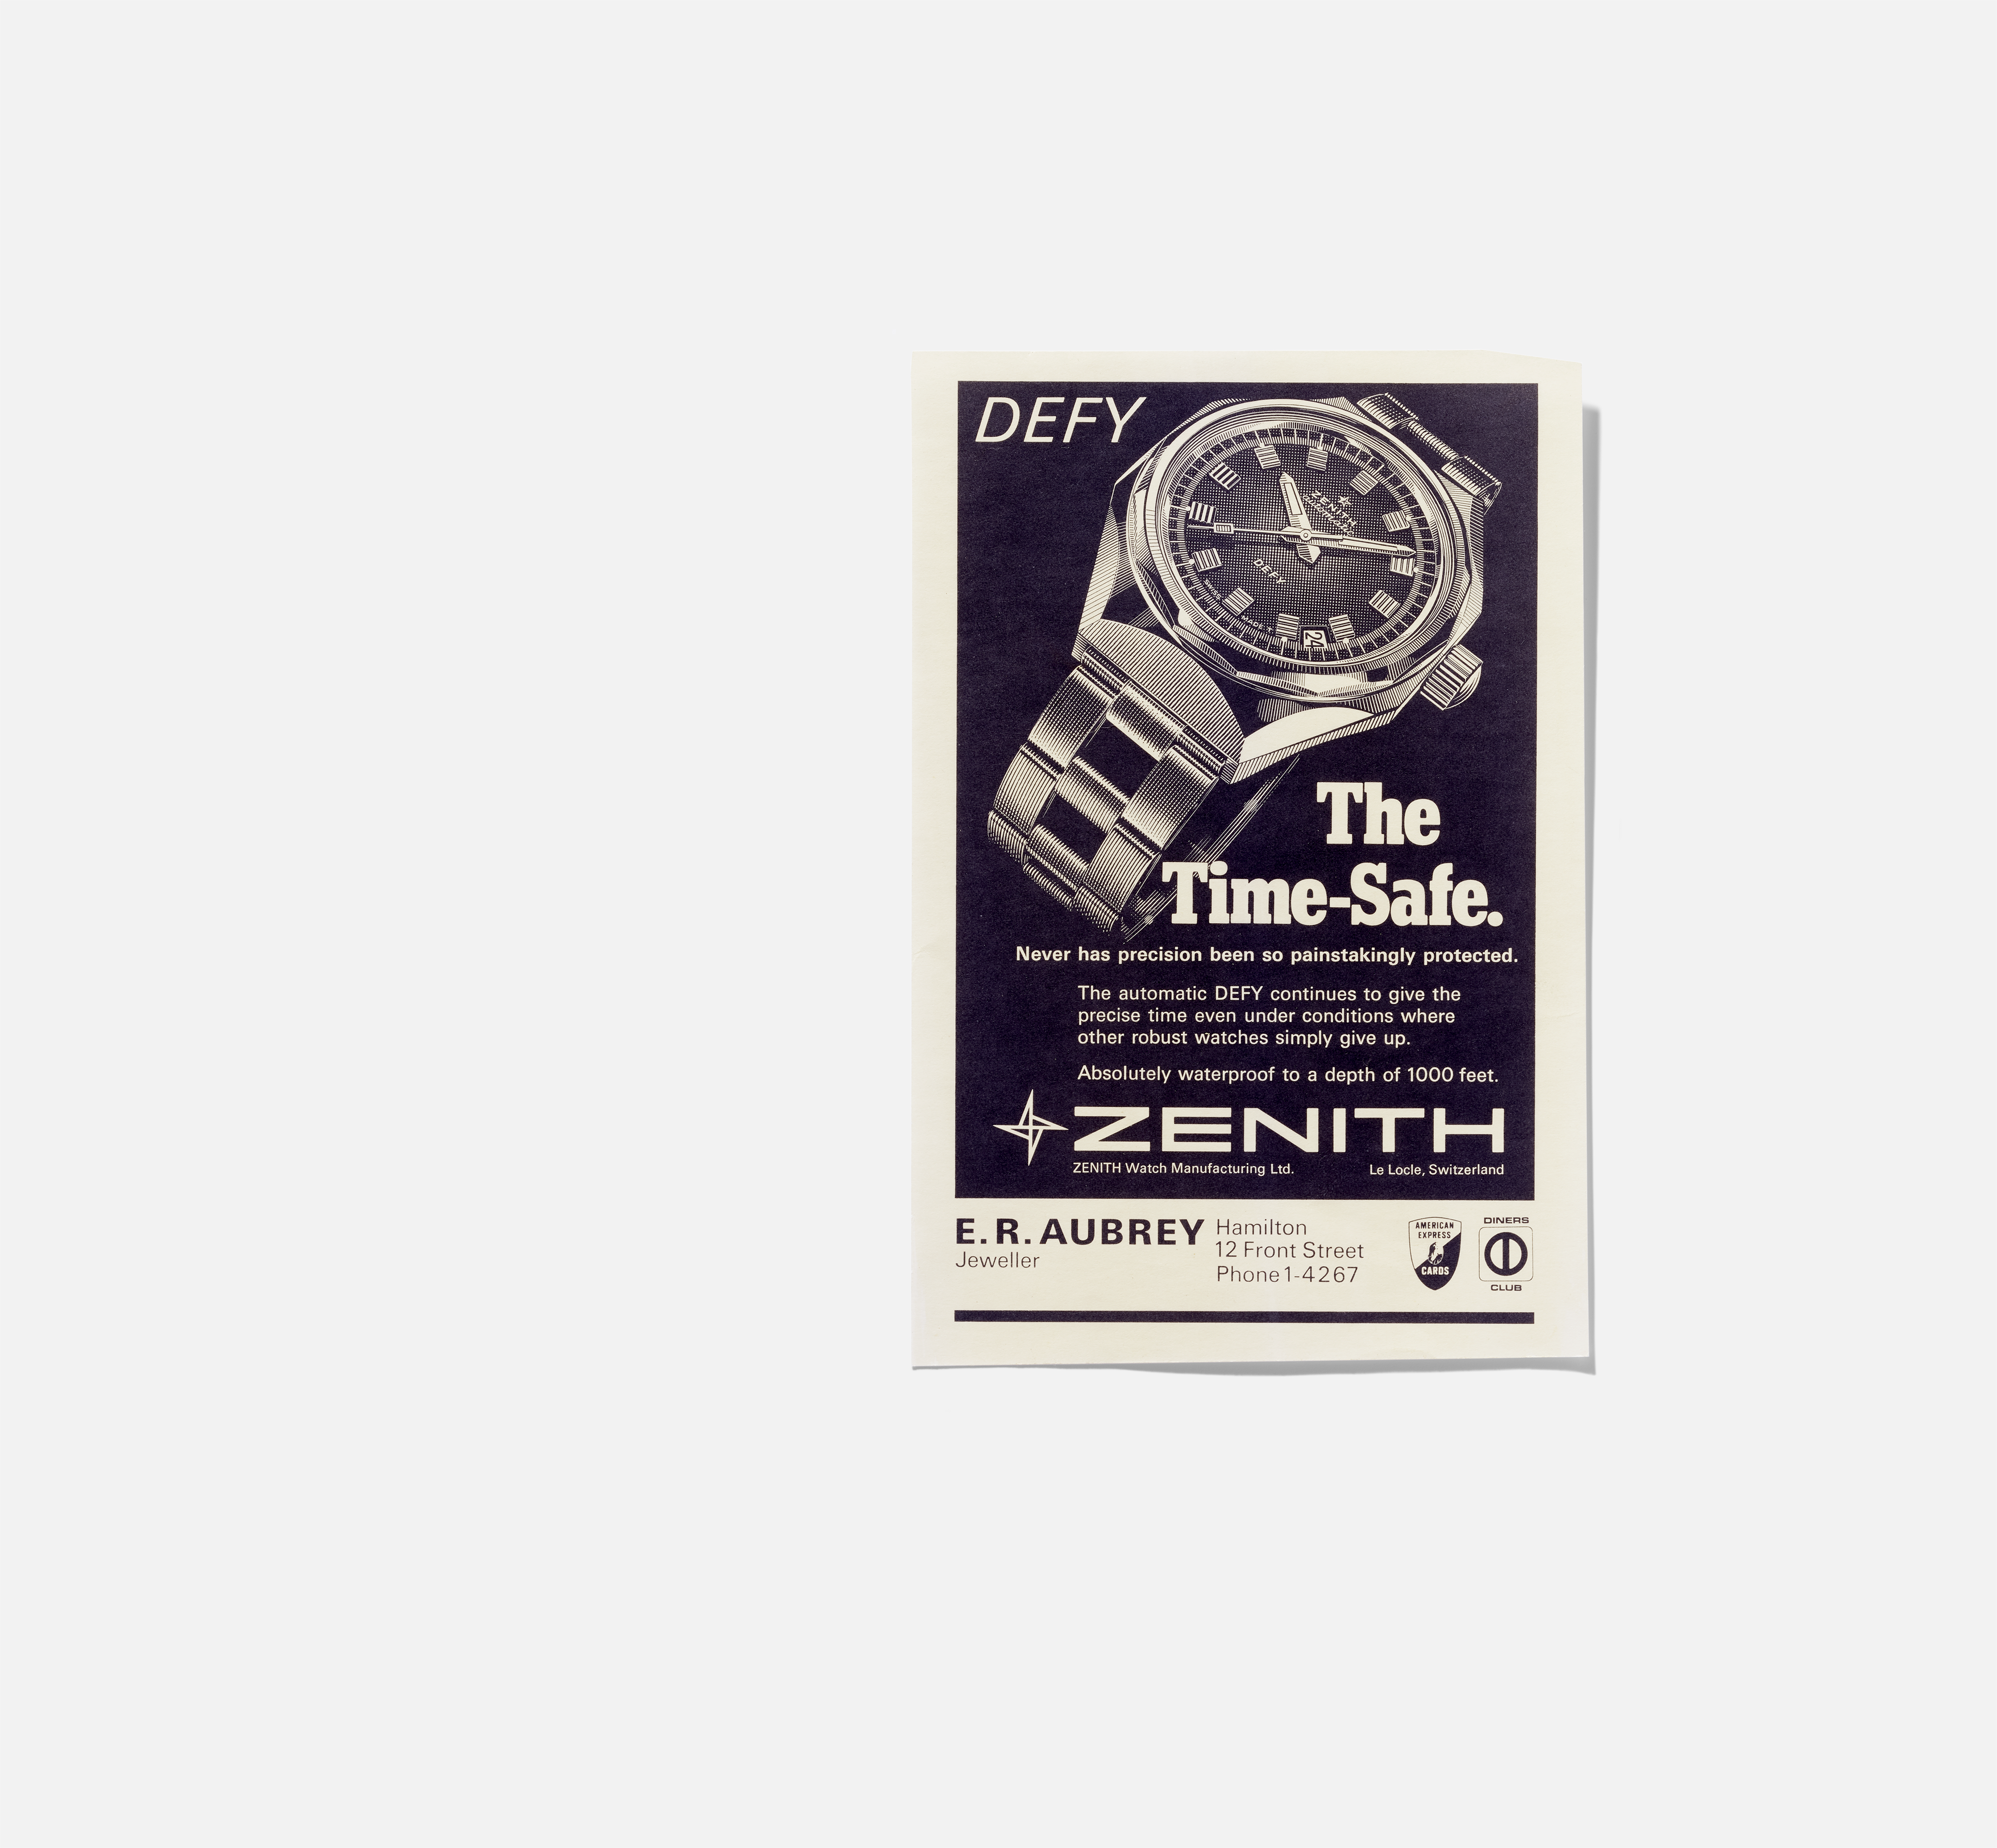 Zenith Honors Its Other 1969 Debut, The Defy A3642, With A Revival